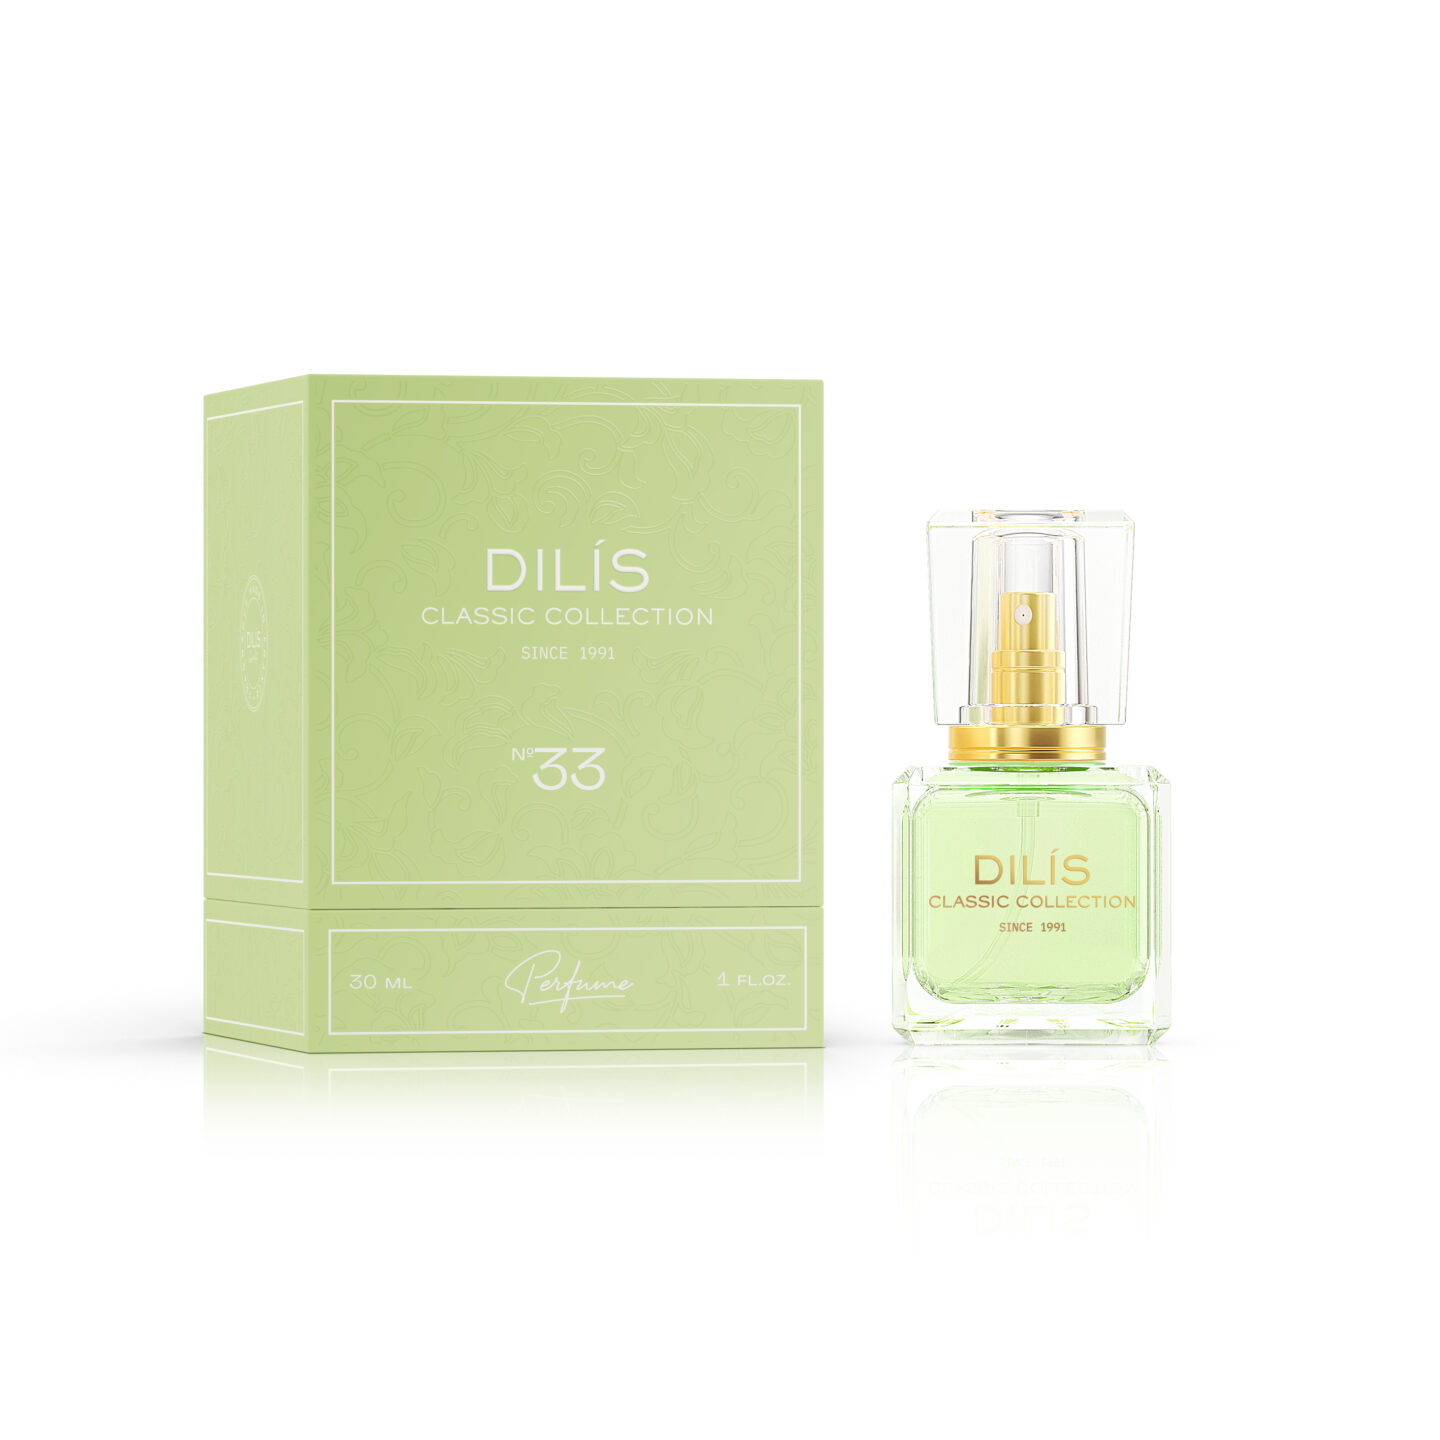 Духи Dilis Parfum Classic Collection №33 30 мл dilis niche collection flower overdose 50